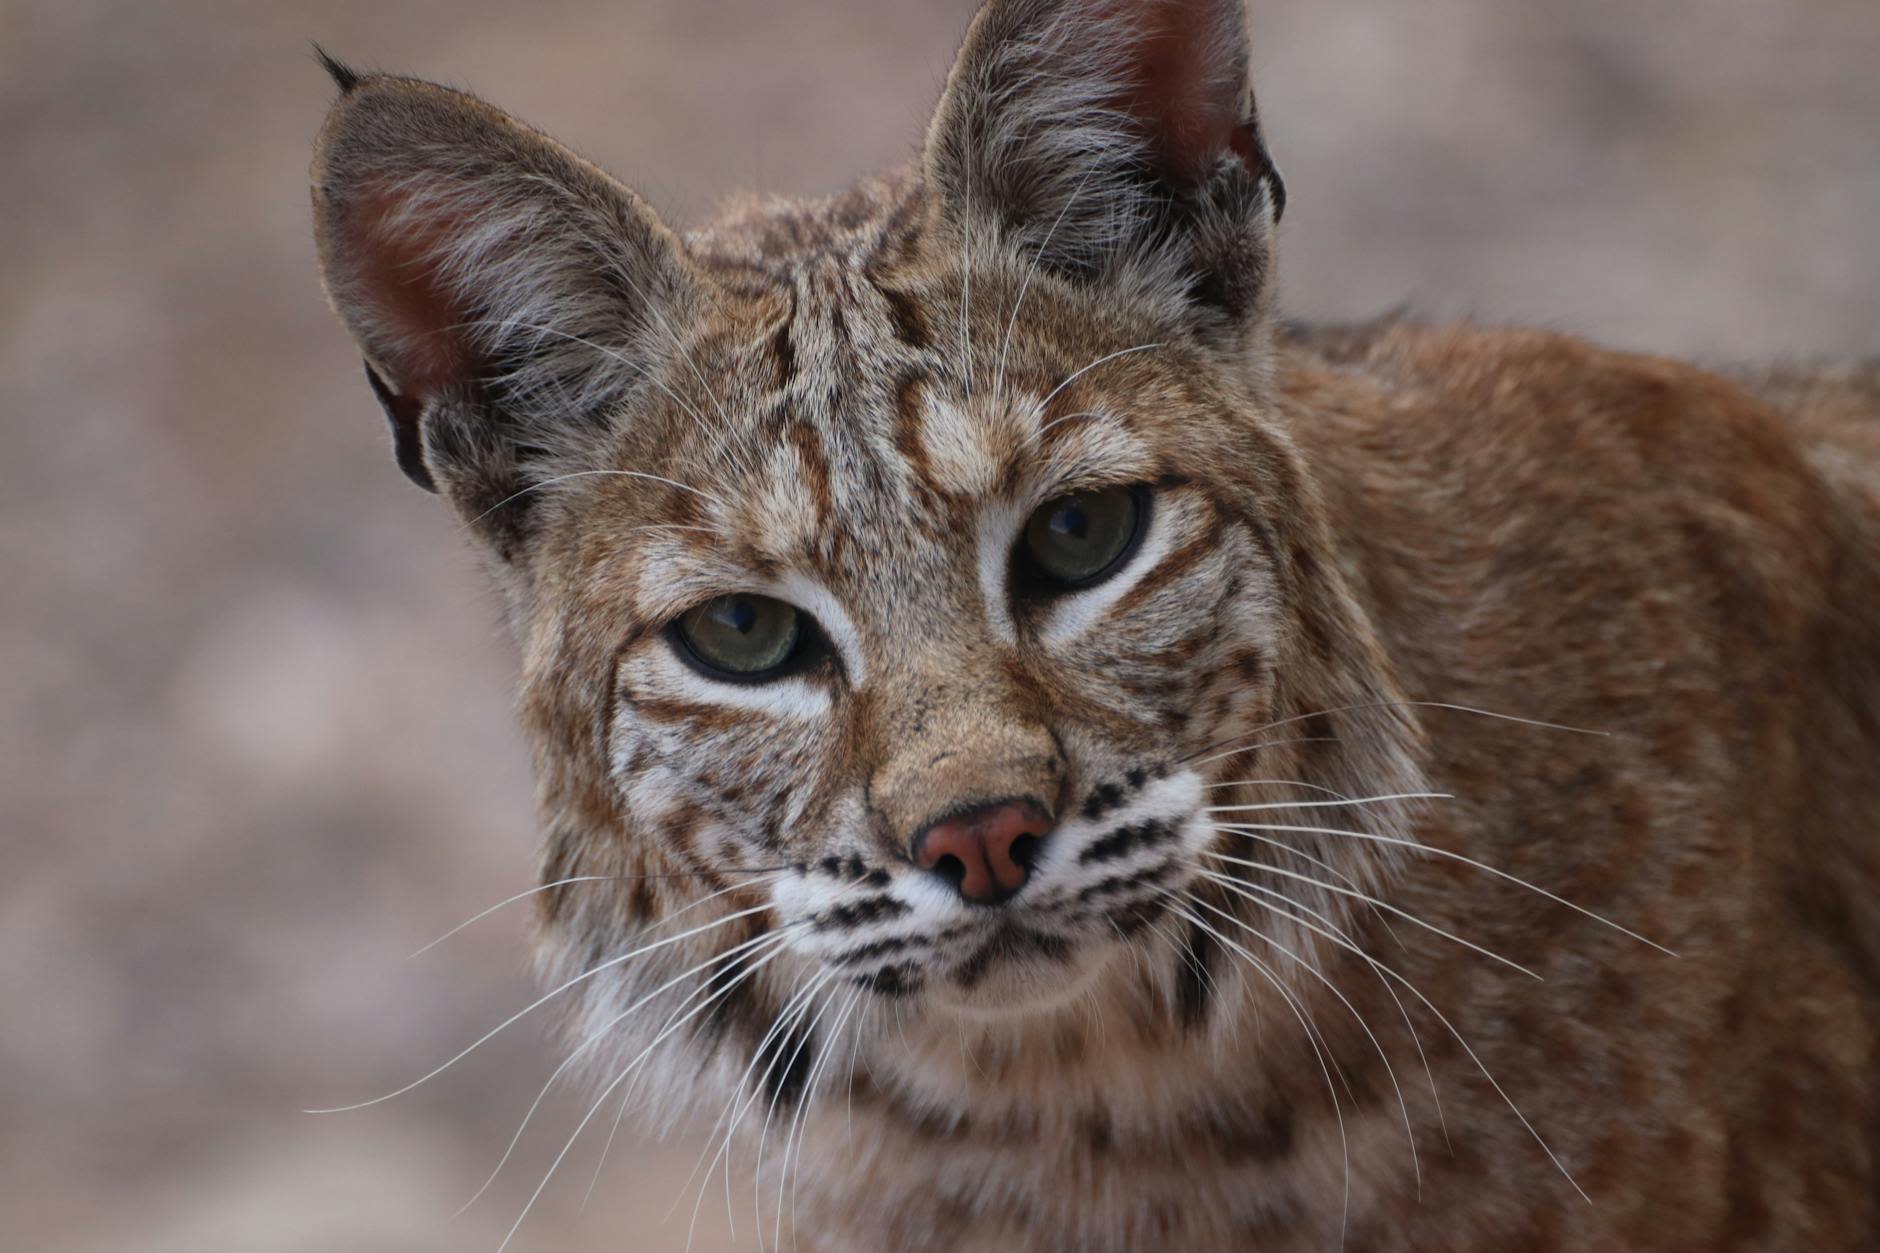 Video: FWC releases bobcat after rehab stint at Naples Zoo